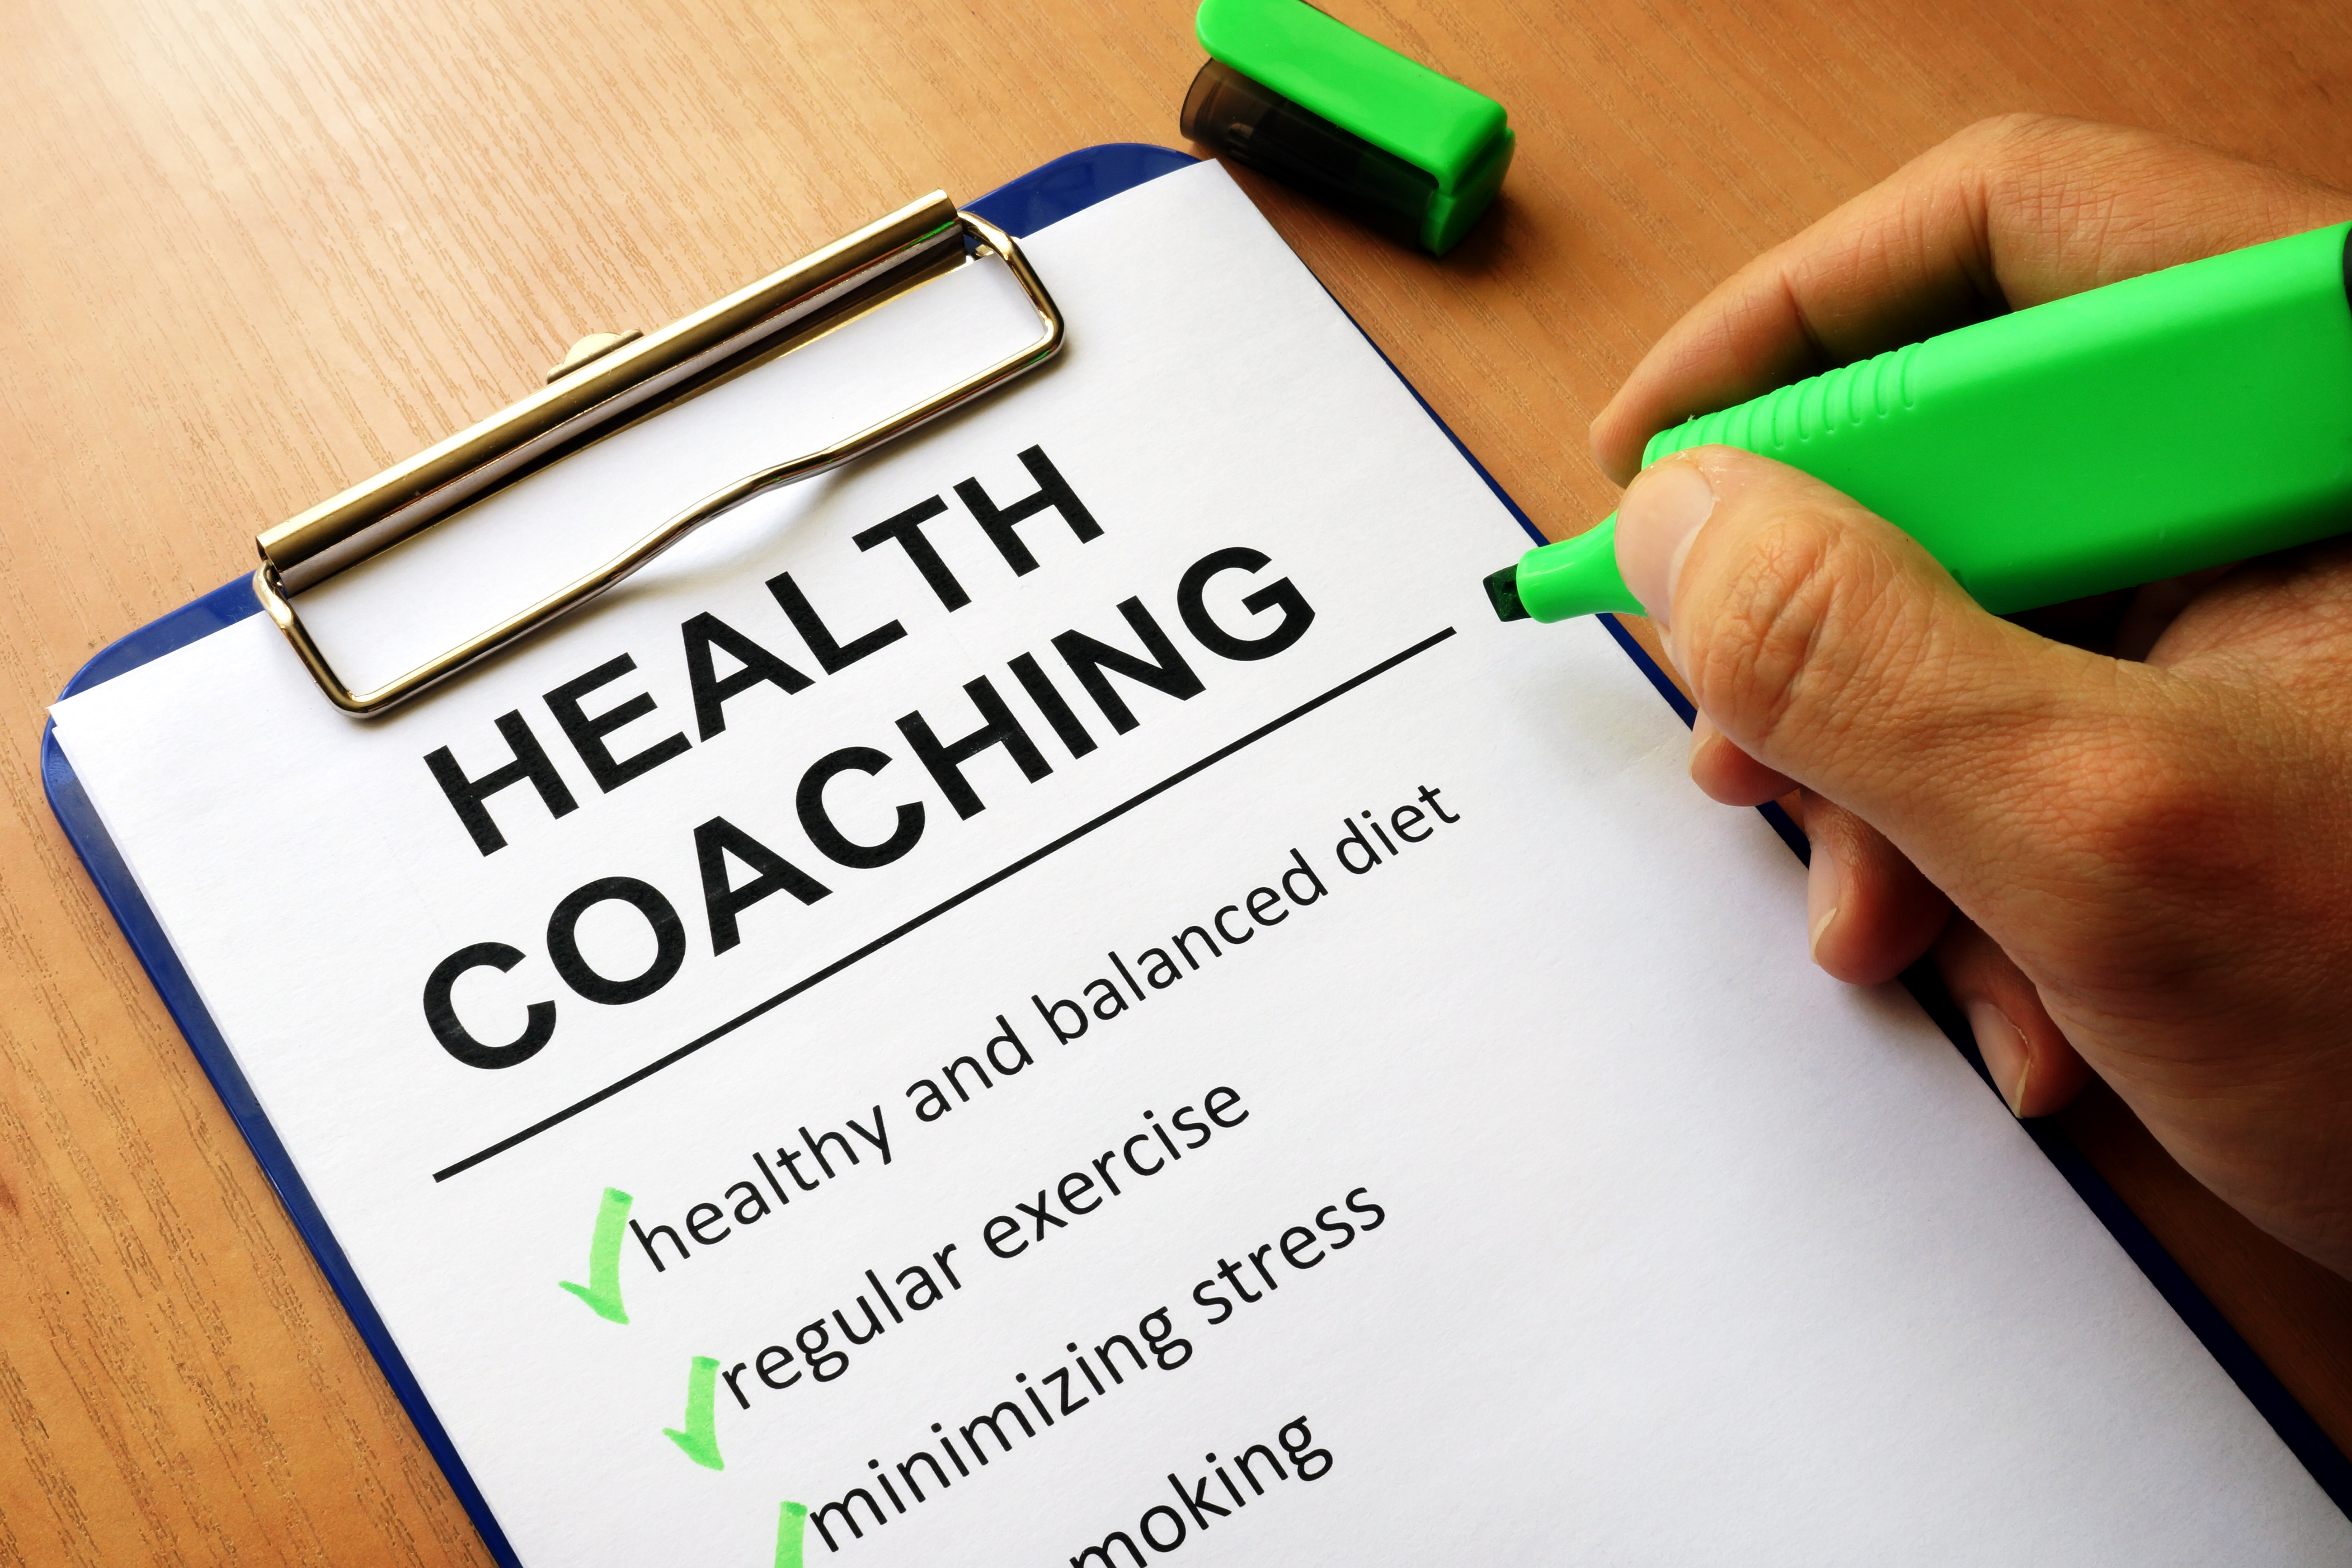 Online Forum Rules and Terms - Health Coach - image shutterstock_657955471-1 on https://docuhealth.com